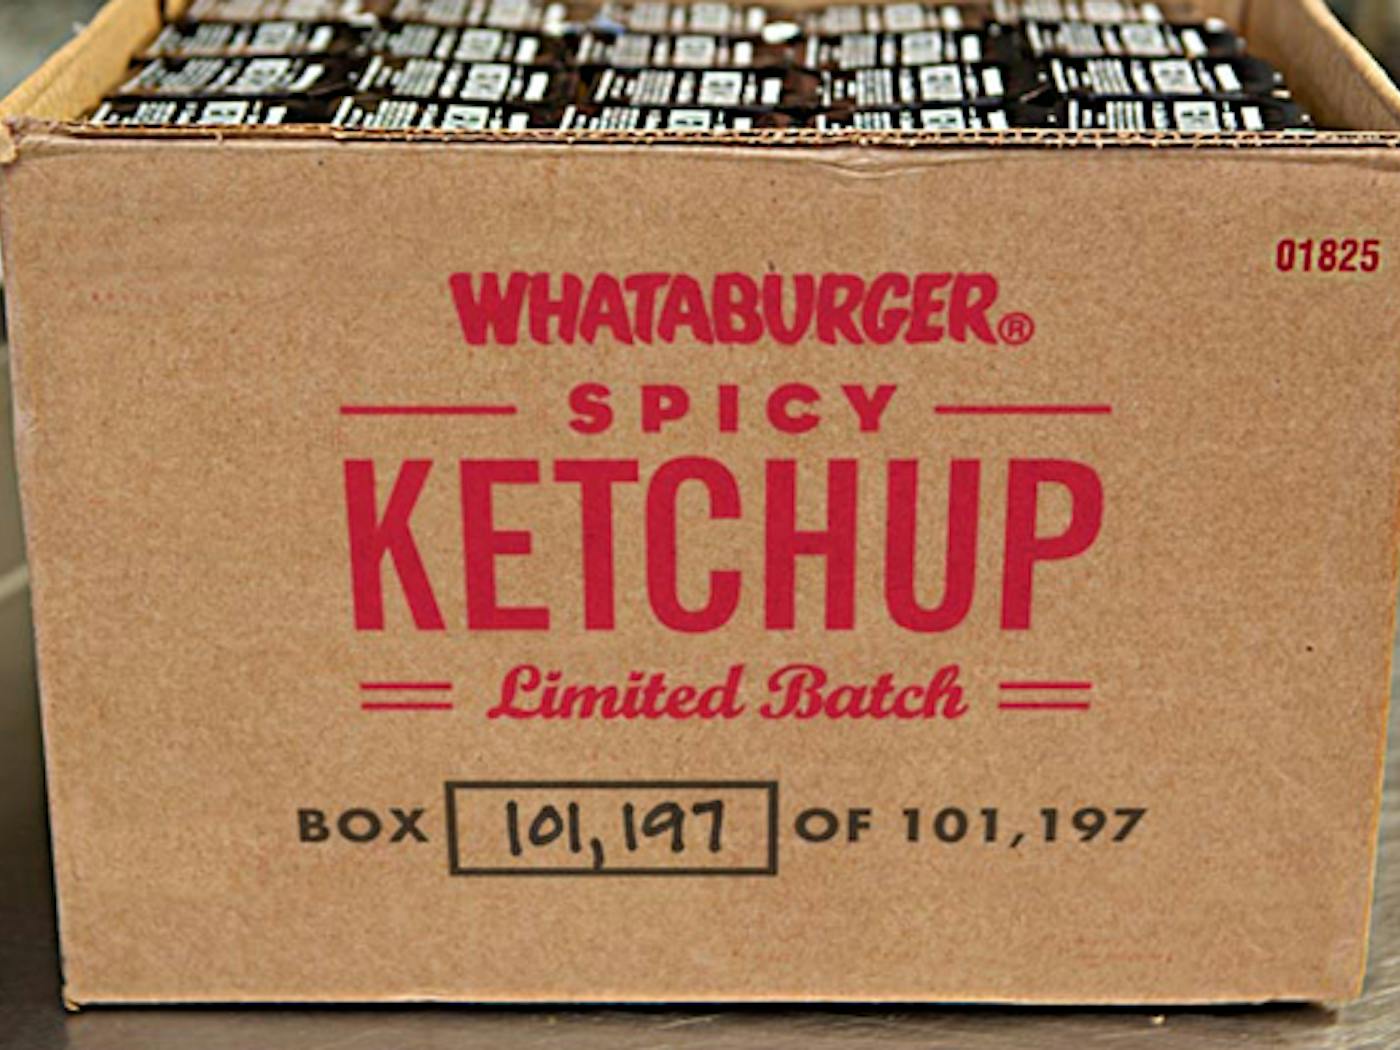 https://img.texasmonthly.com/2012/04/spicyketchup.png?auto=compress&crop=faces&fit=crop&fm=jpg&h=1050&ixlib=php-3.3.1&q=45&w=1400